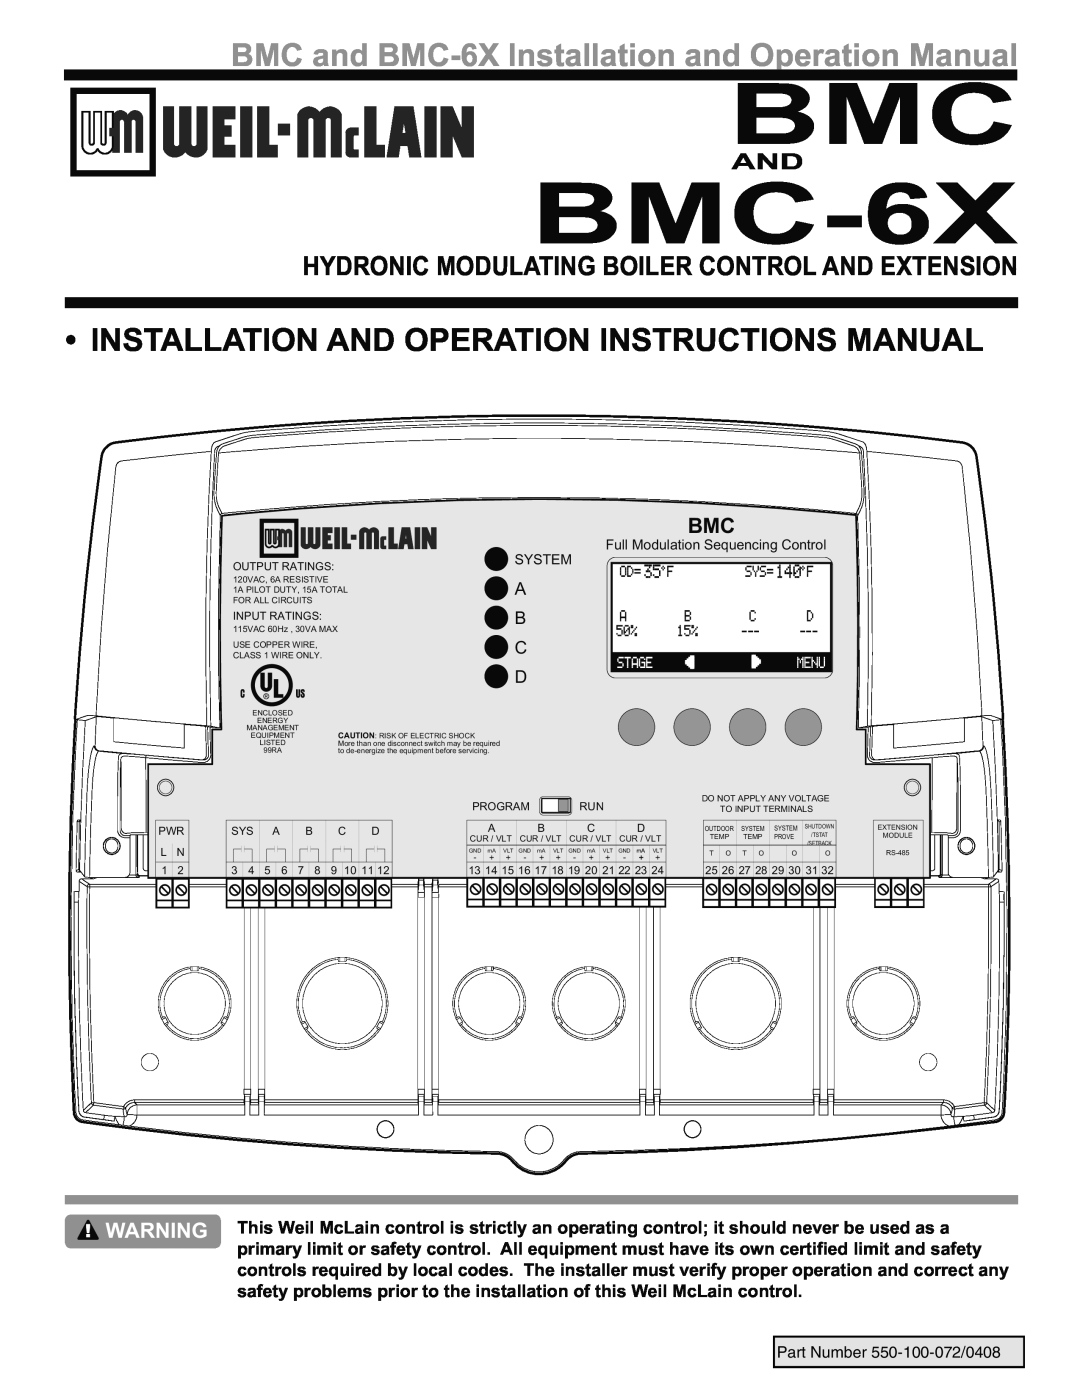 Weil-McLain BMC-6X operation manual Installation And Operation Instructions Manual 